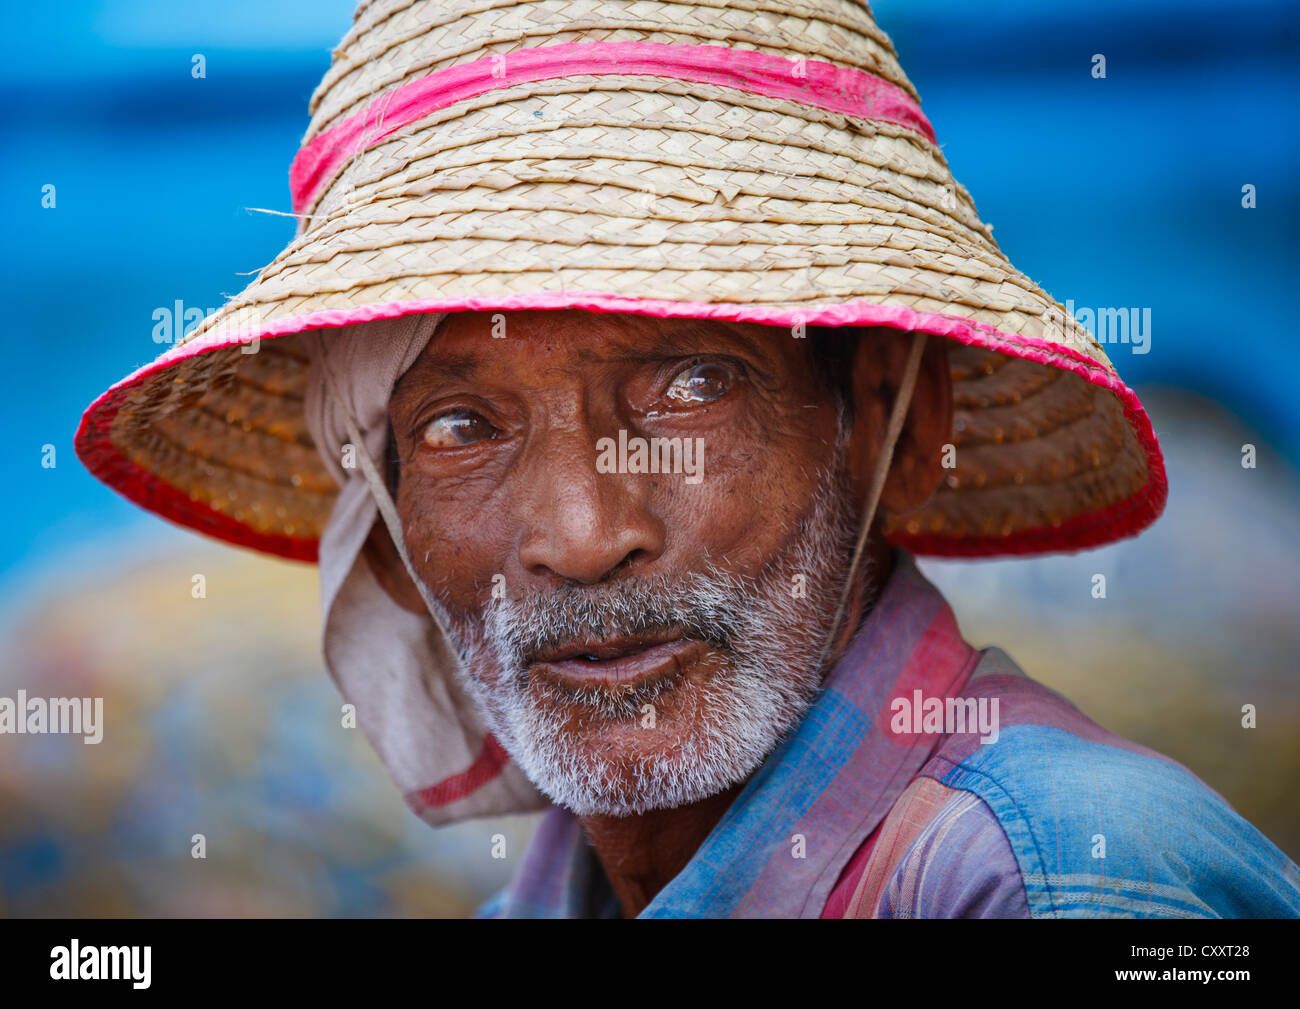 https://c8.alamy.com/comp/CXXT28/portrait-of-an-old-fisherman-wearing-a-straw-hat-mahe-india-CXXT28.jpg